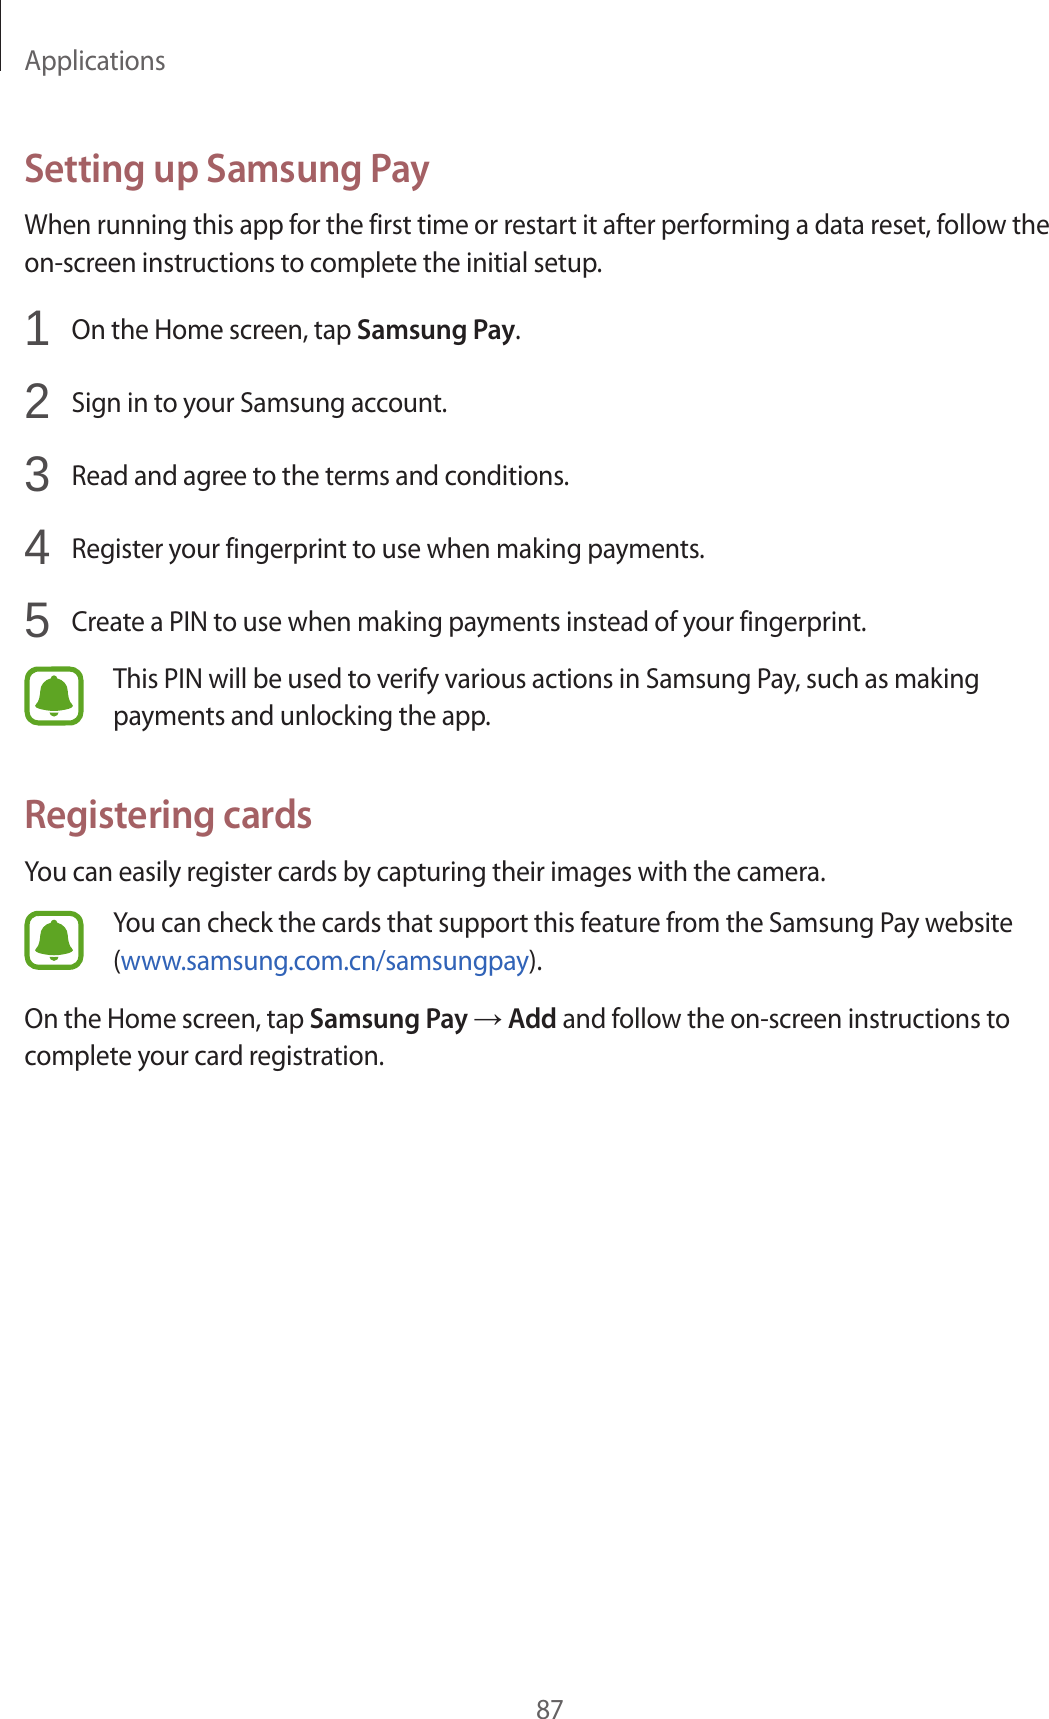 Applications87Setting up Samsung PayWhen running this app for the first time or restart it after performing a data reset, follow the on-screen instructions to complete the initial setup.1  On the Home screen, tap Samsung Pay.2  Sign in to your Samsung account.3  Read and agree to the terms and conditions.4  Register your fingerprint to use when making payments.5  Create a PIN to use when making payments instead of your fingerprint.This PIN will be used to verify various actions in Samsung Pay, such as making payments and unlocking the app.Registering cardsYou can easily register cards by capturing their images with the camera.You can check the cards that support this feature from the Samsung Pay website (www.samsung.com.cn/samsungpay).On the Home screen, tap Samsung Pay → Add and follow the on-screen instructions to complete your card registration.